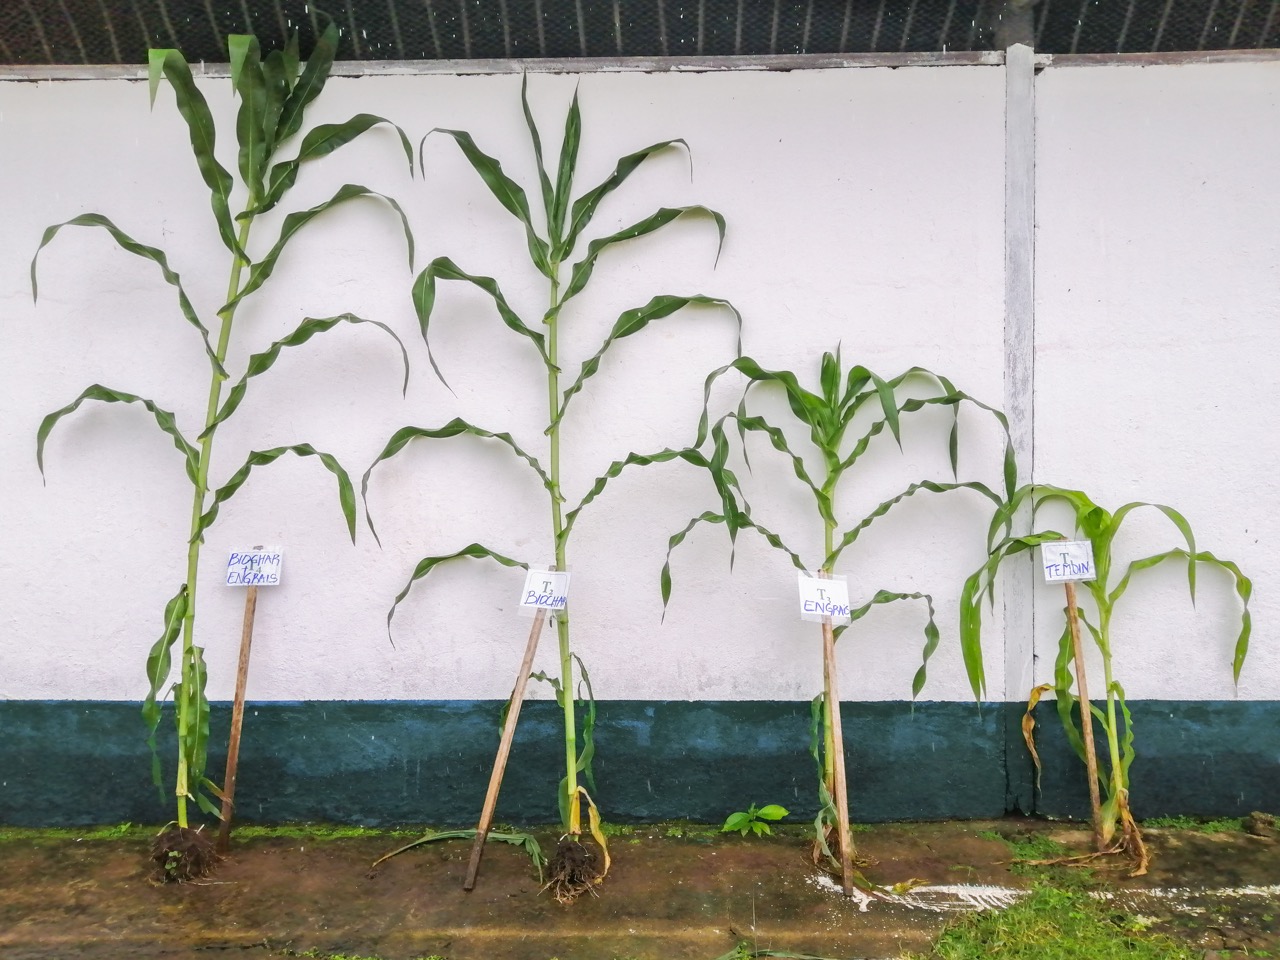 Agronomic trial on maize, showing a clear difference with and without biochar.